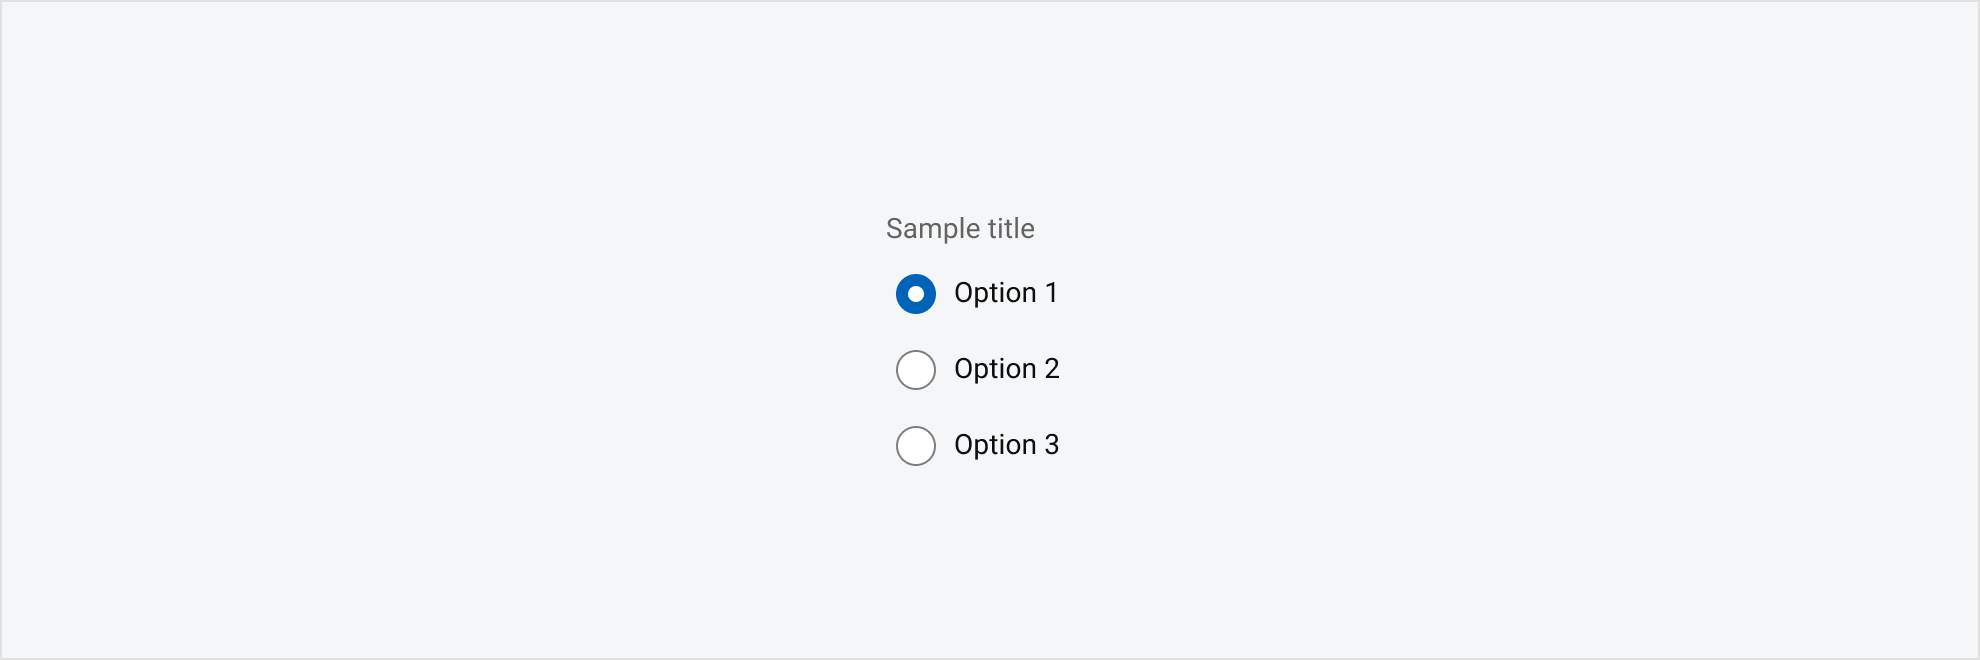 An example of a radio button group.